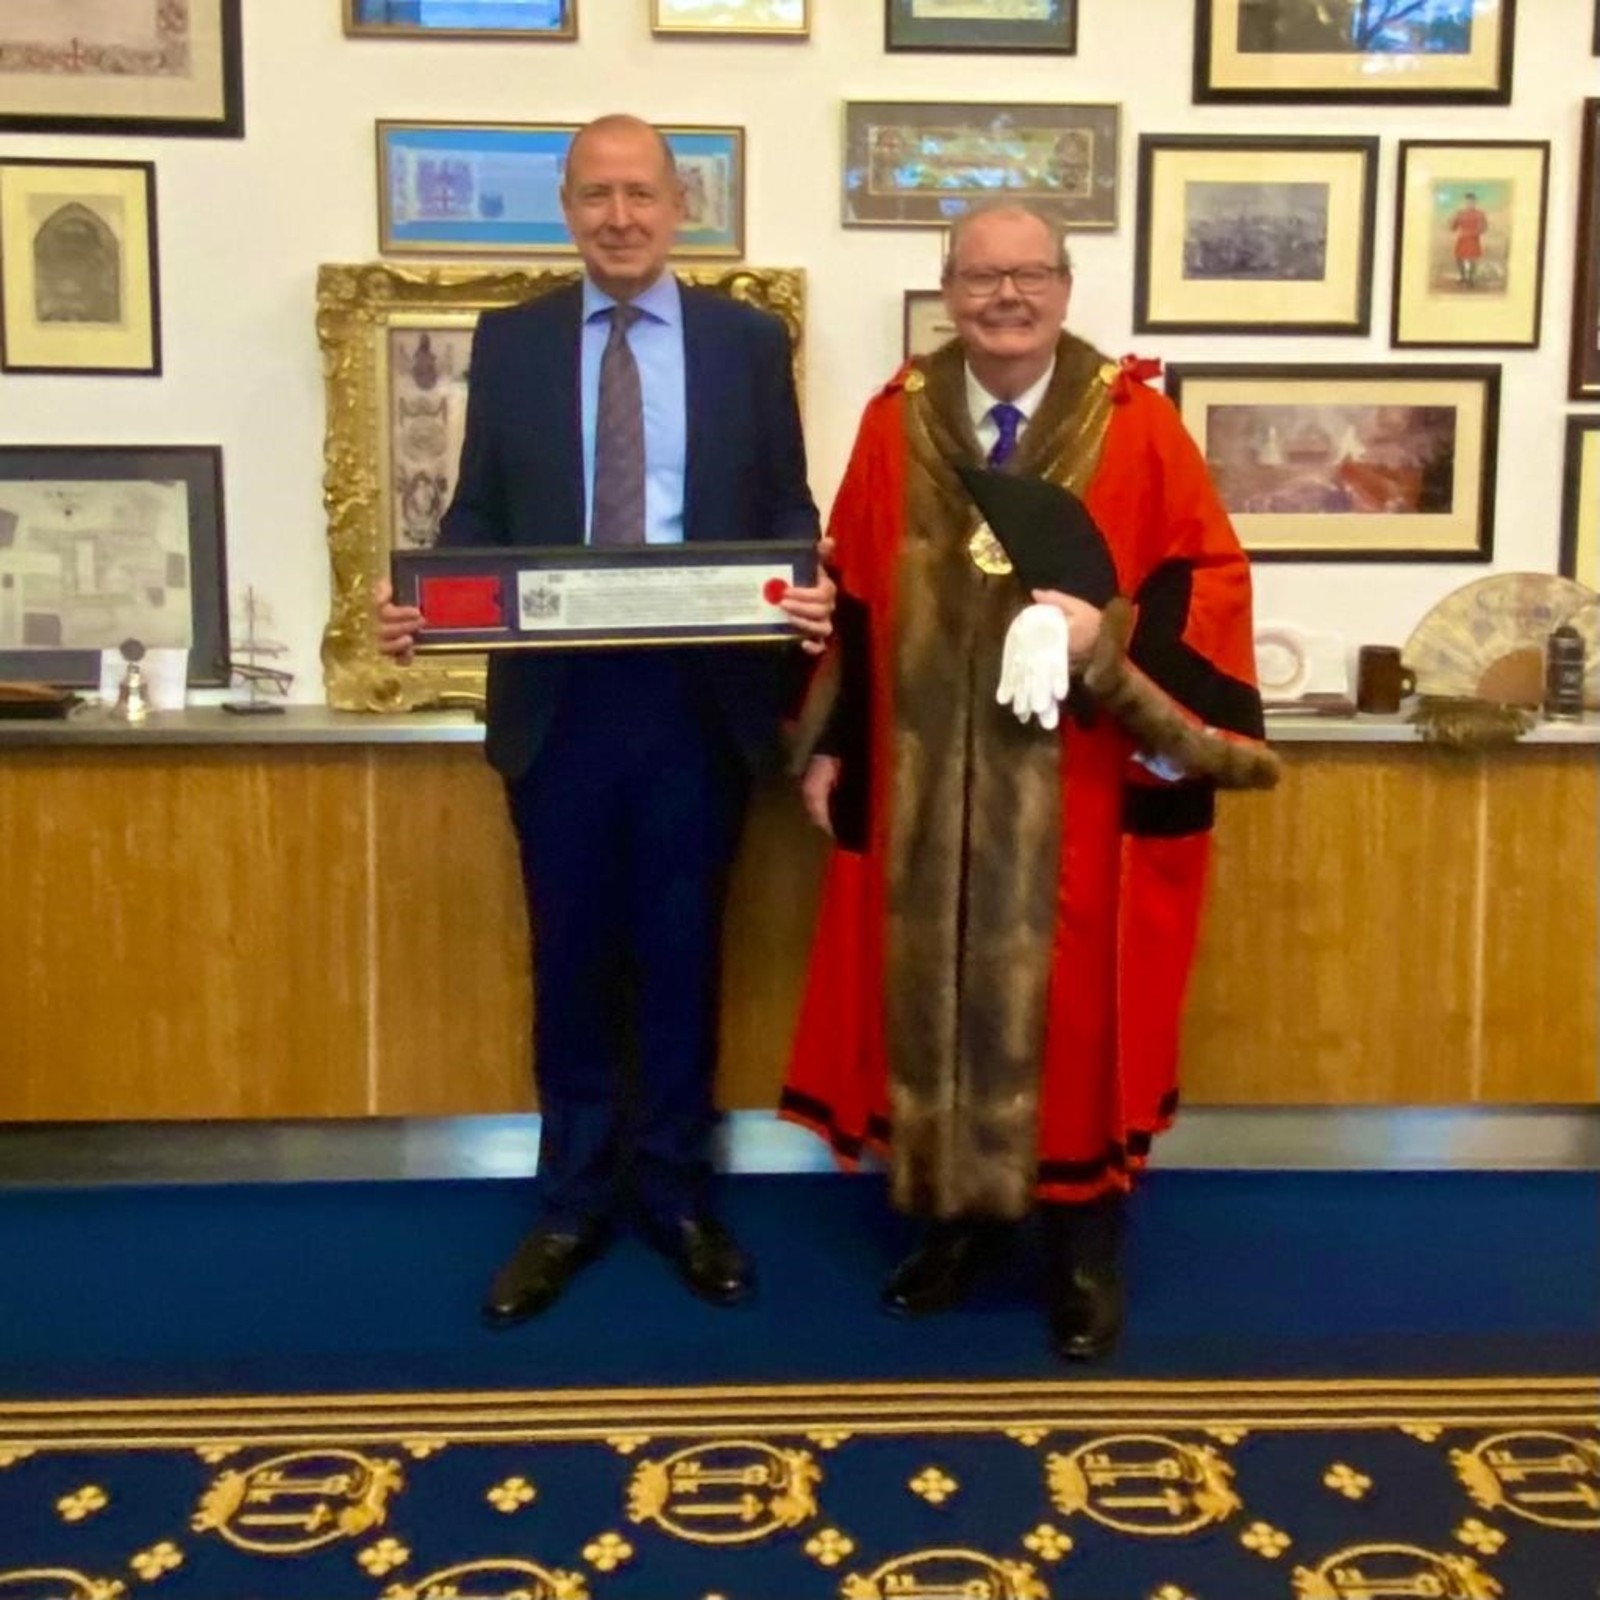 24 August 2023 - At was a real pleasure to attend His Honour, Old Bailey Judge, Simon Mayo KC’s Freedom Ceremony at The Chamberlain’s Court.